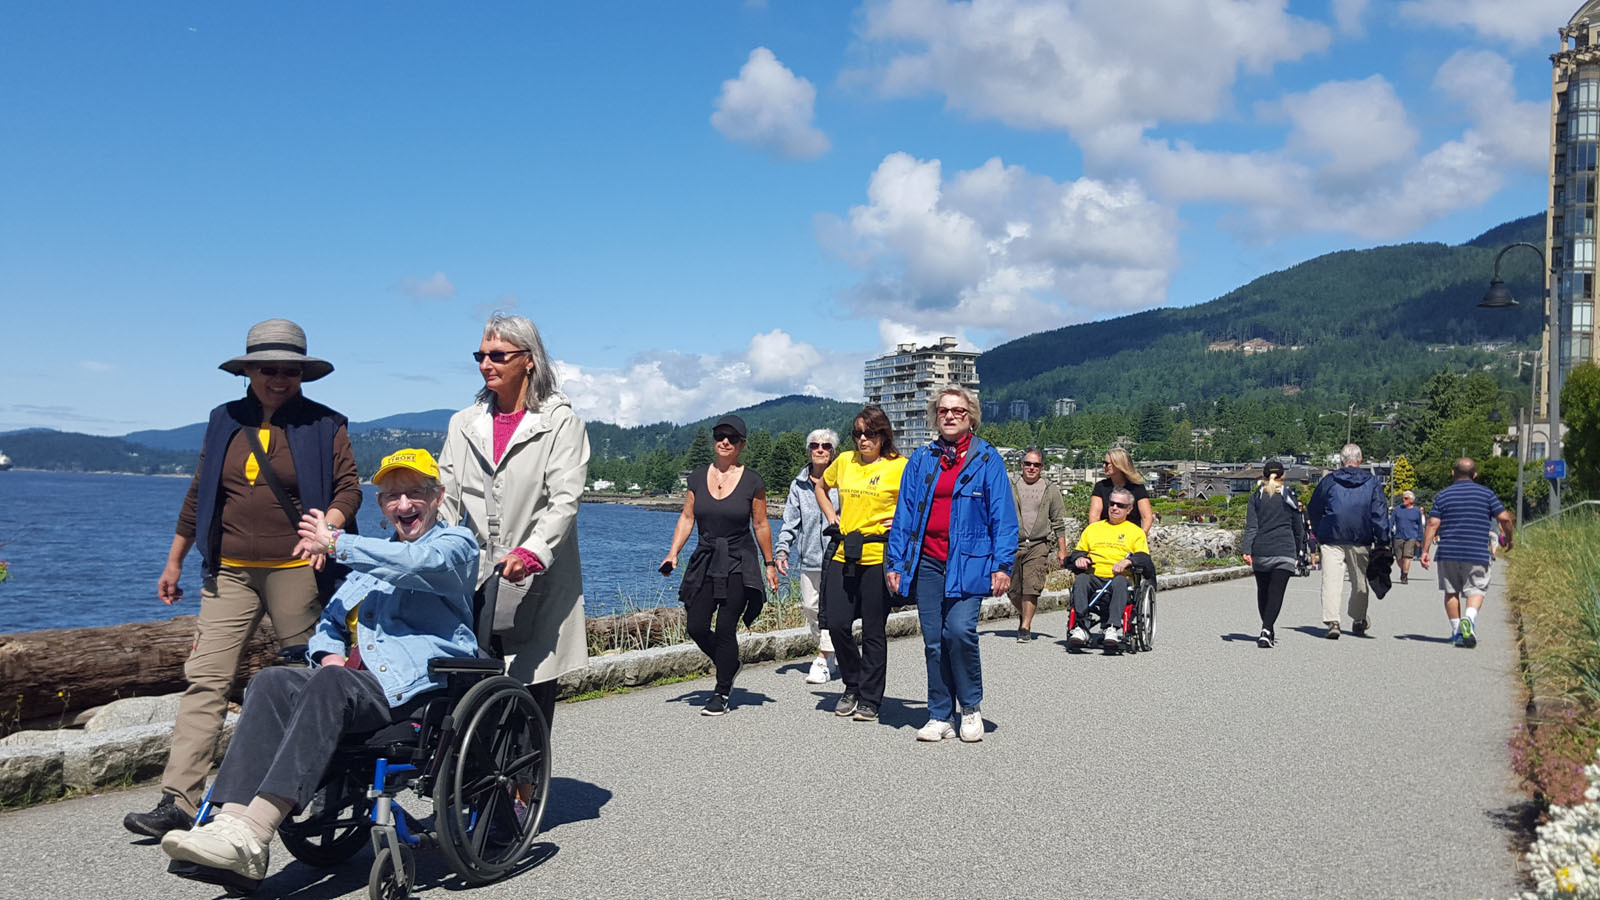 Strides for Strokes Annual Walk, West Vancouver, British Columbia, Canada